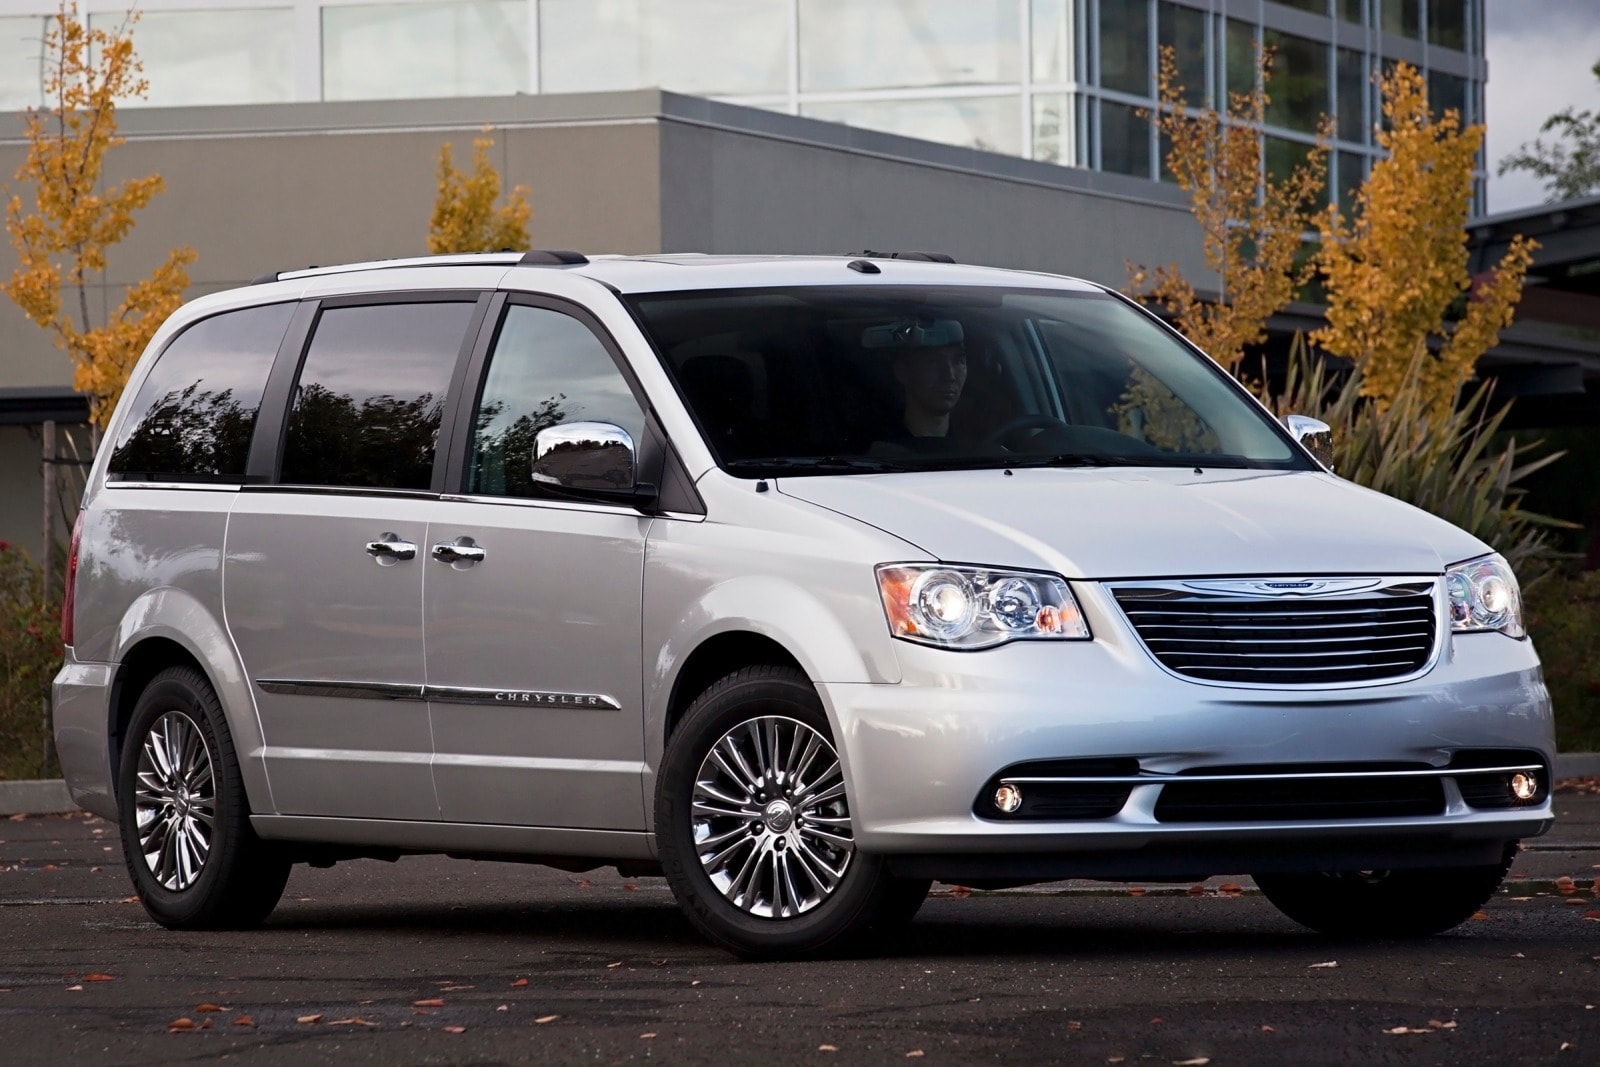 2014 Chrysler Town and Country Review & Ratings | Edmunds